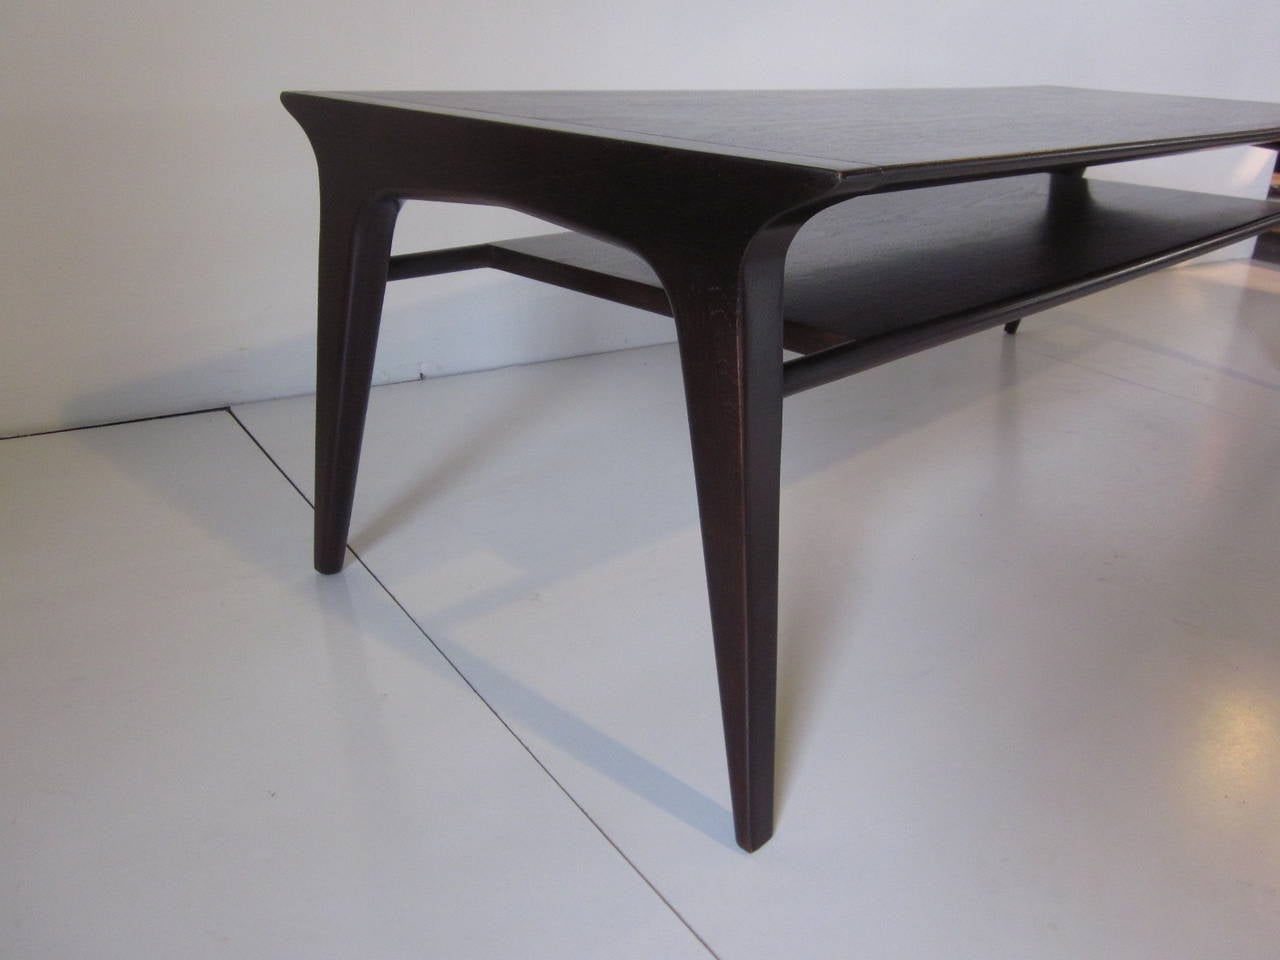 A dark and rich ebony toned coffee table with lower second shelve with great simple lines manufactured by the Drexel Furniture Company.